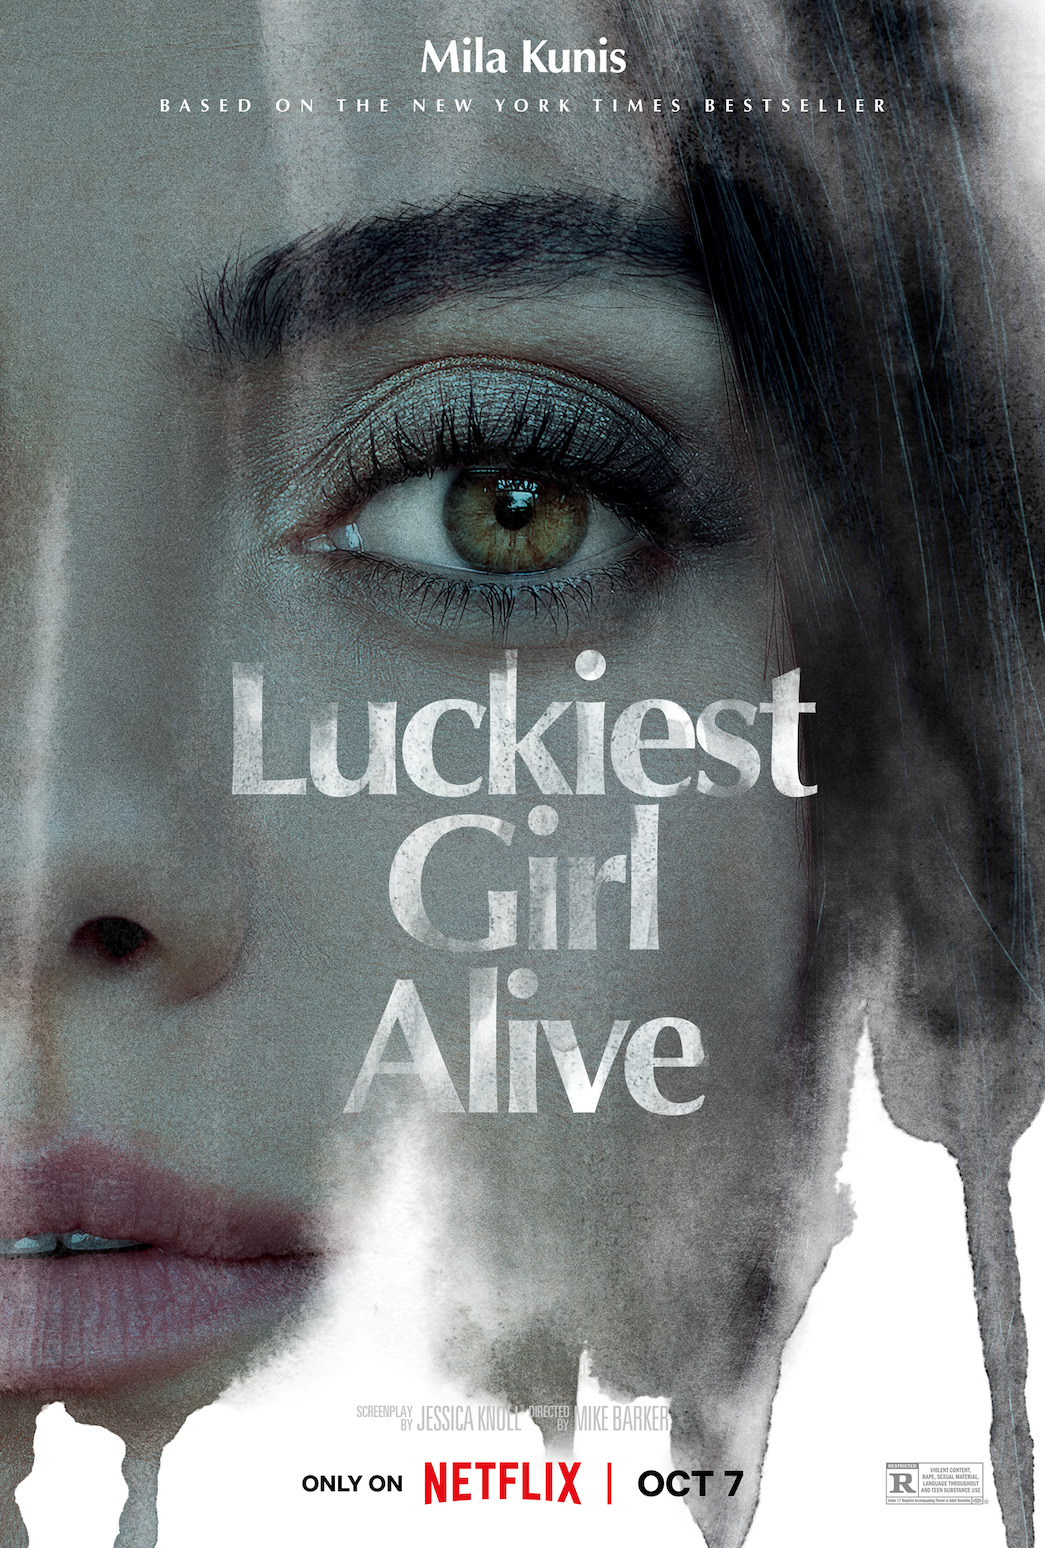 ‘Luckiest Girl Alive’ Trailer and…